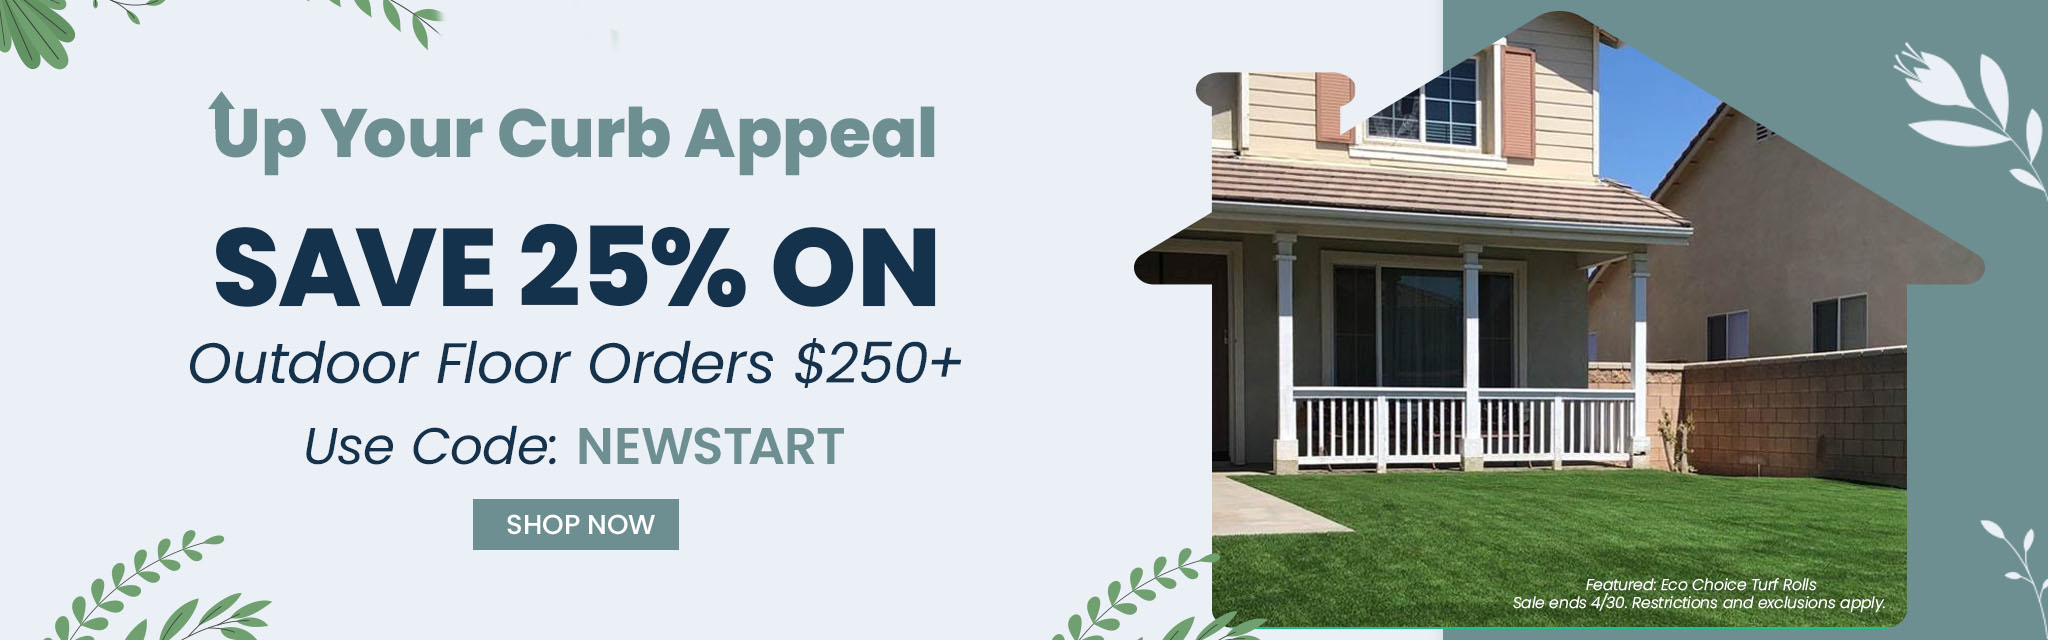 Up Your Curb Appeal This Spring | Save 25% on Outdoor Floor Orders $250+ | Use Code: NEWSTART | Shop Now *Ends 4/30. Restrictions and exclusions apply. 